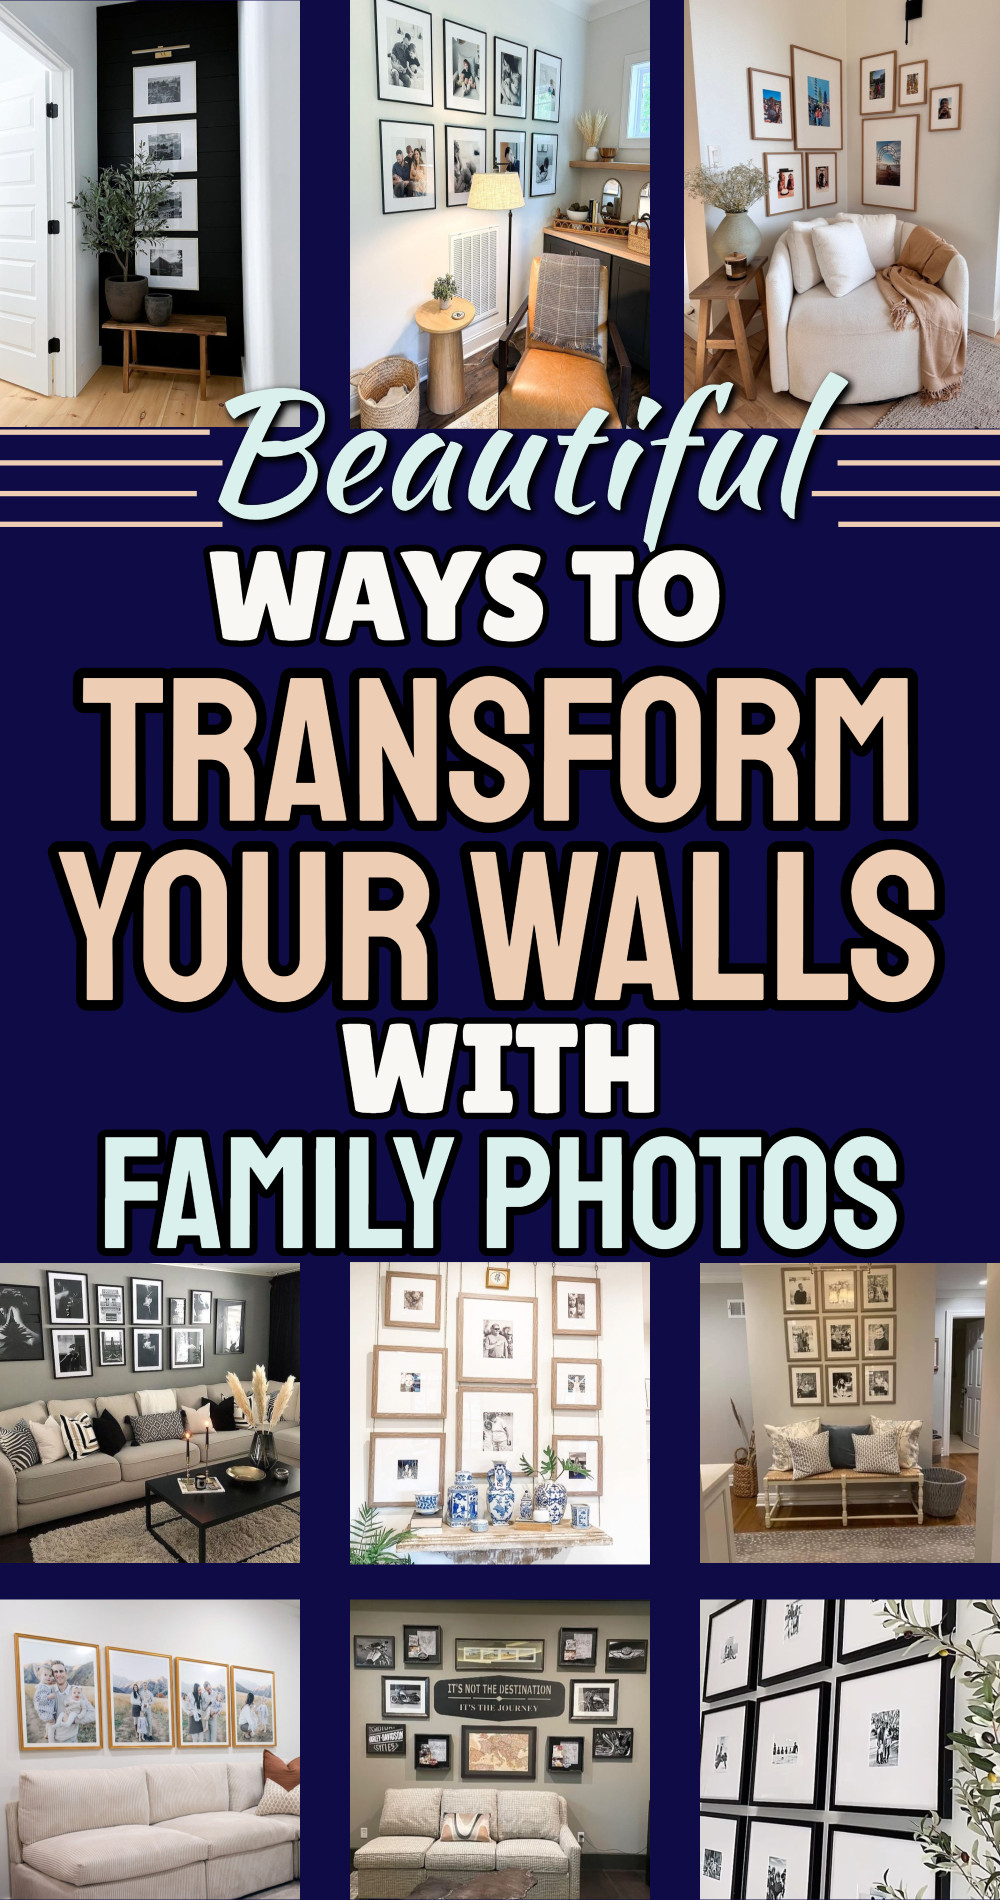 Beautiful ways to transform your walls with family photos